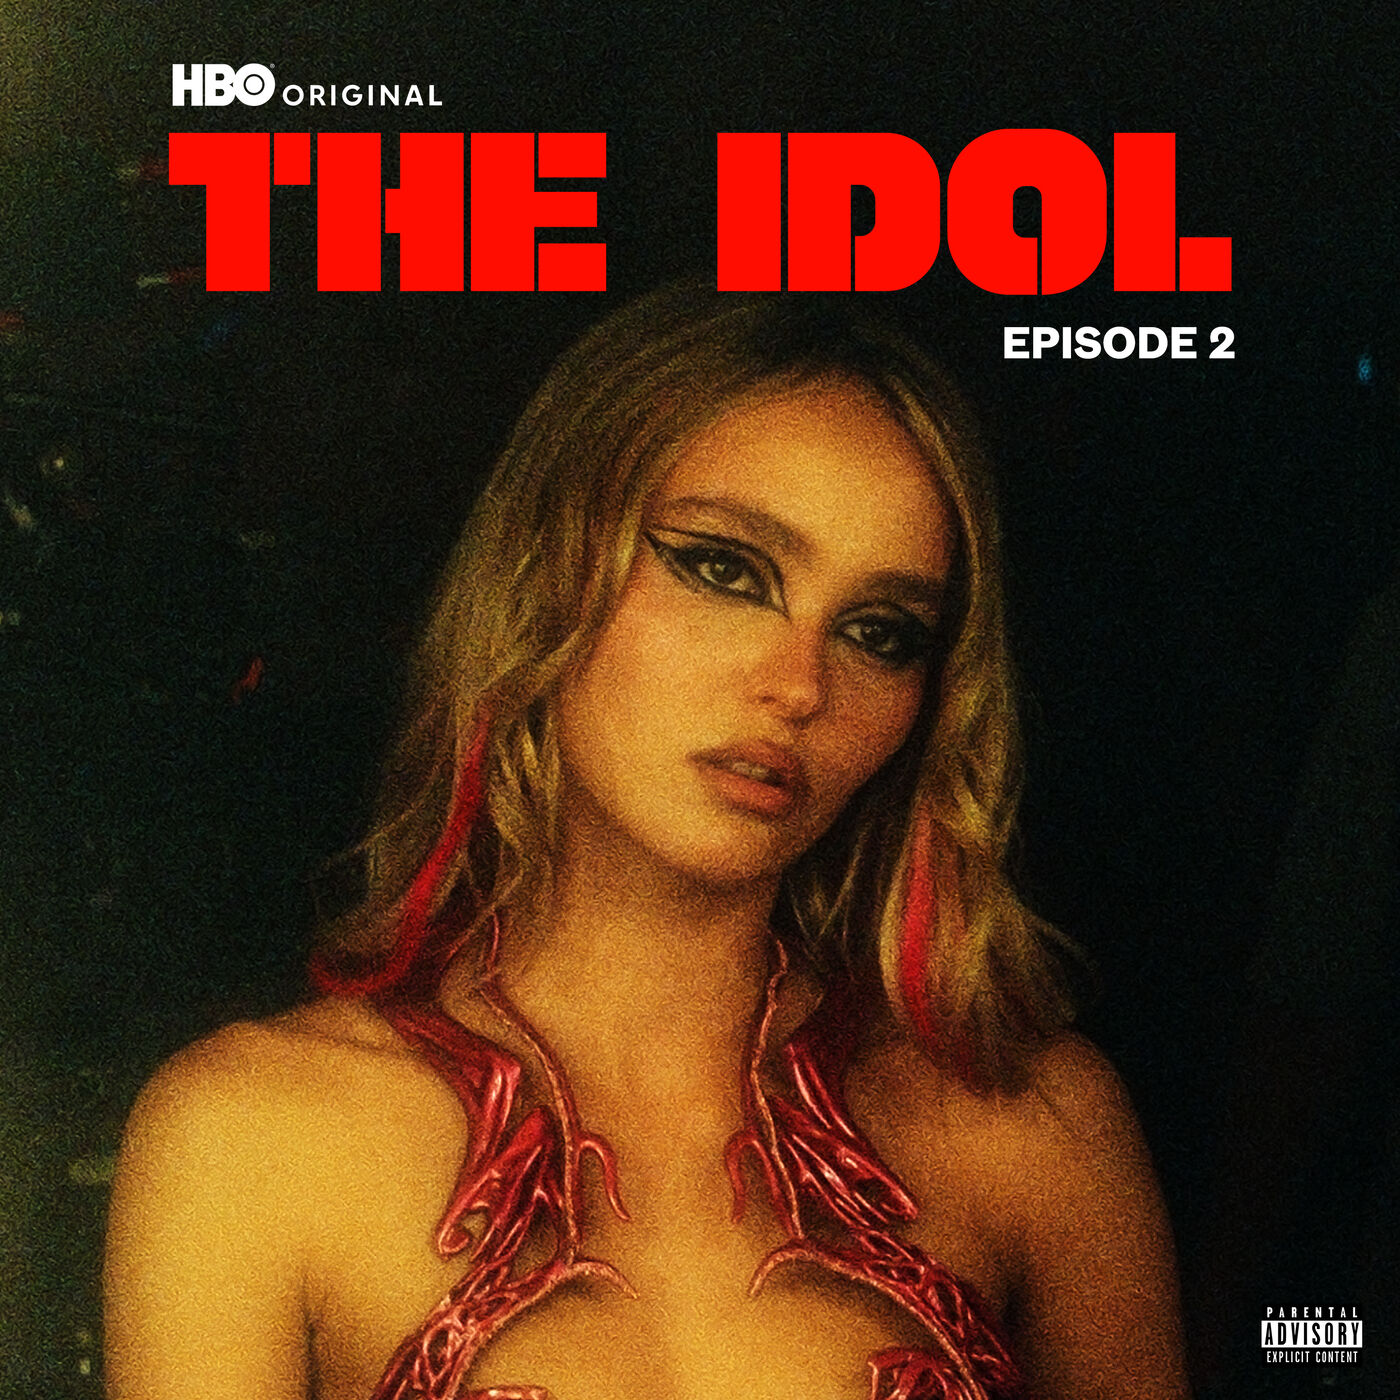 The Weeknd – The Idol Episode 2 (Music from the HBO Original Series)Ⓔ【88.2kHz／24bit】美国区-OppsUpro音乐帝国